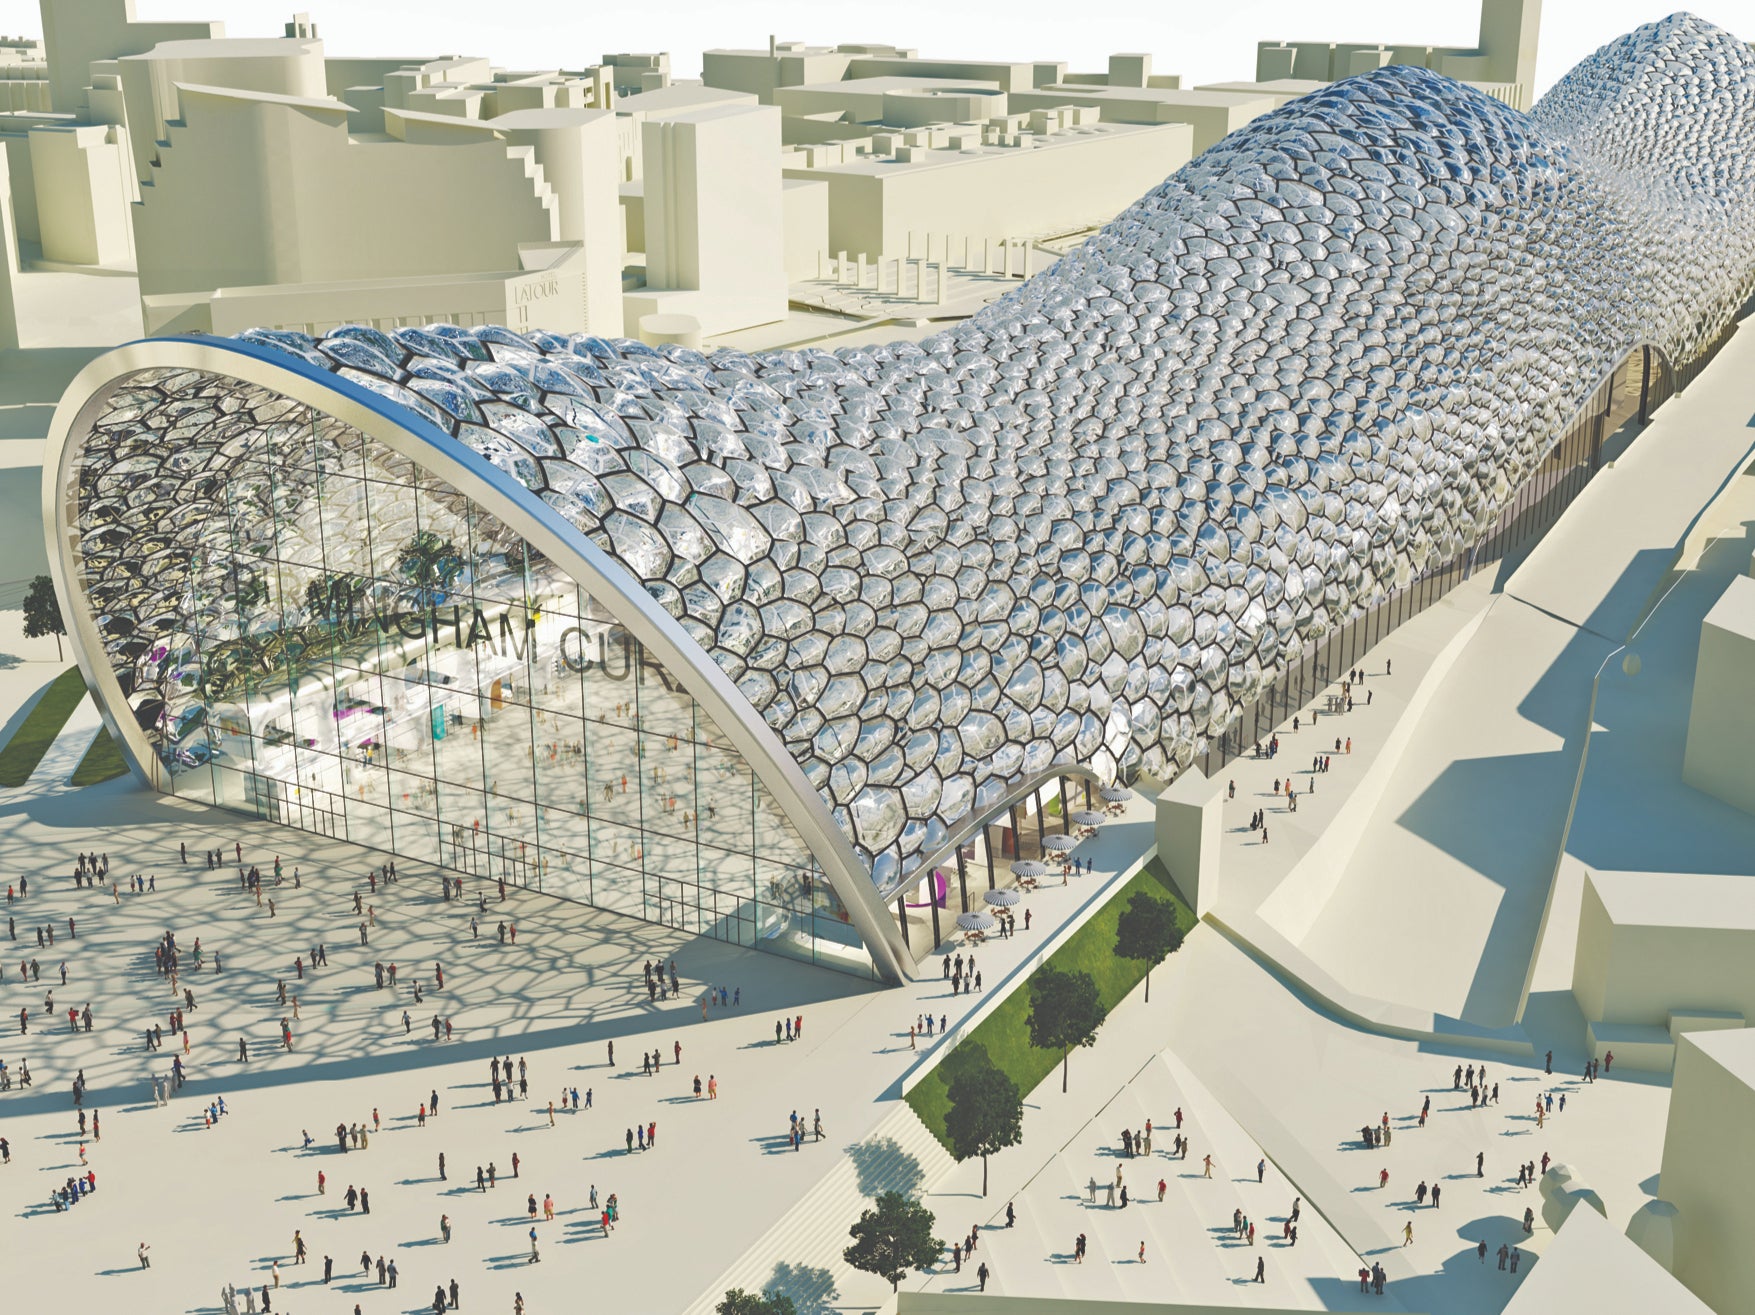 Artist’s impression: The proposed HS2 station at Birmingham Curzon Street